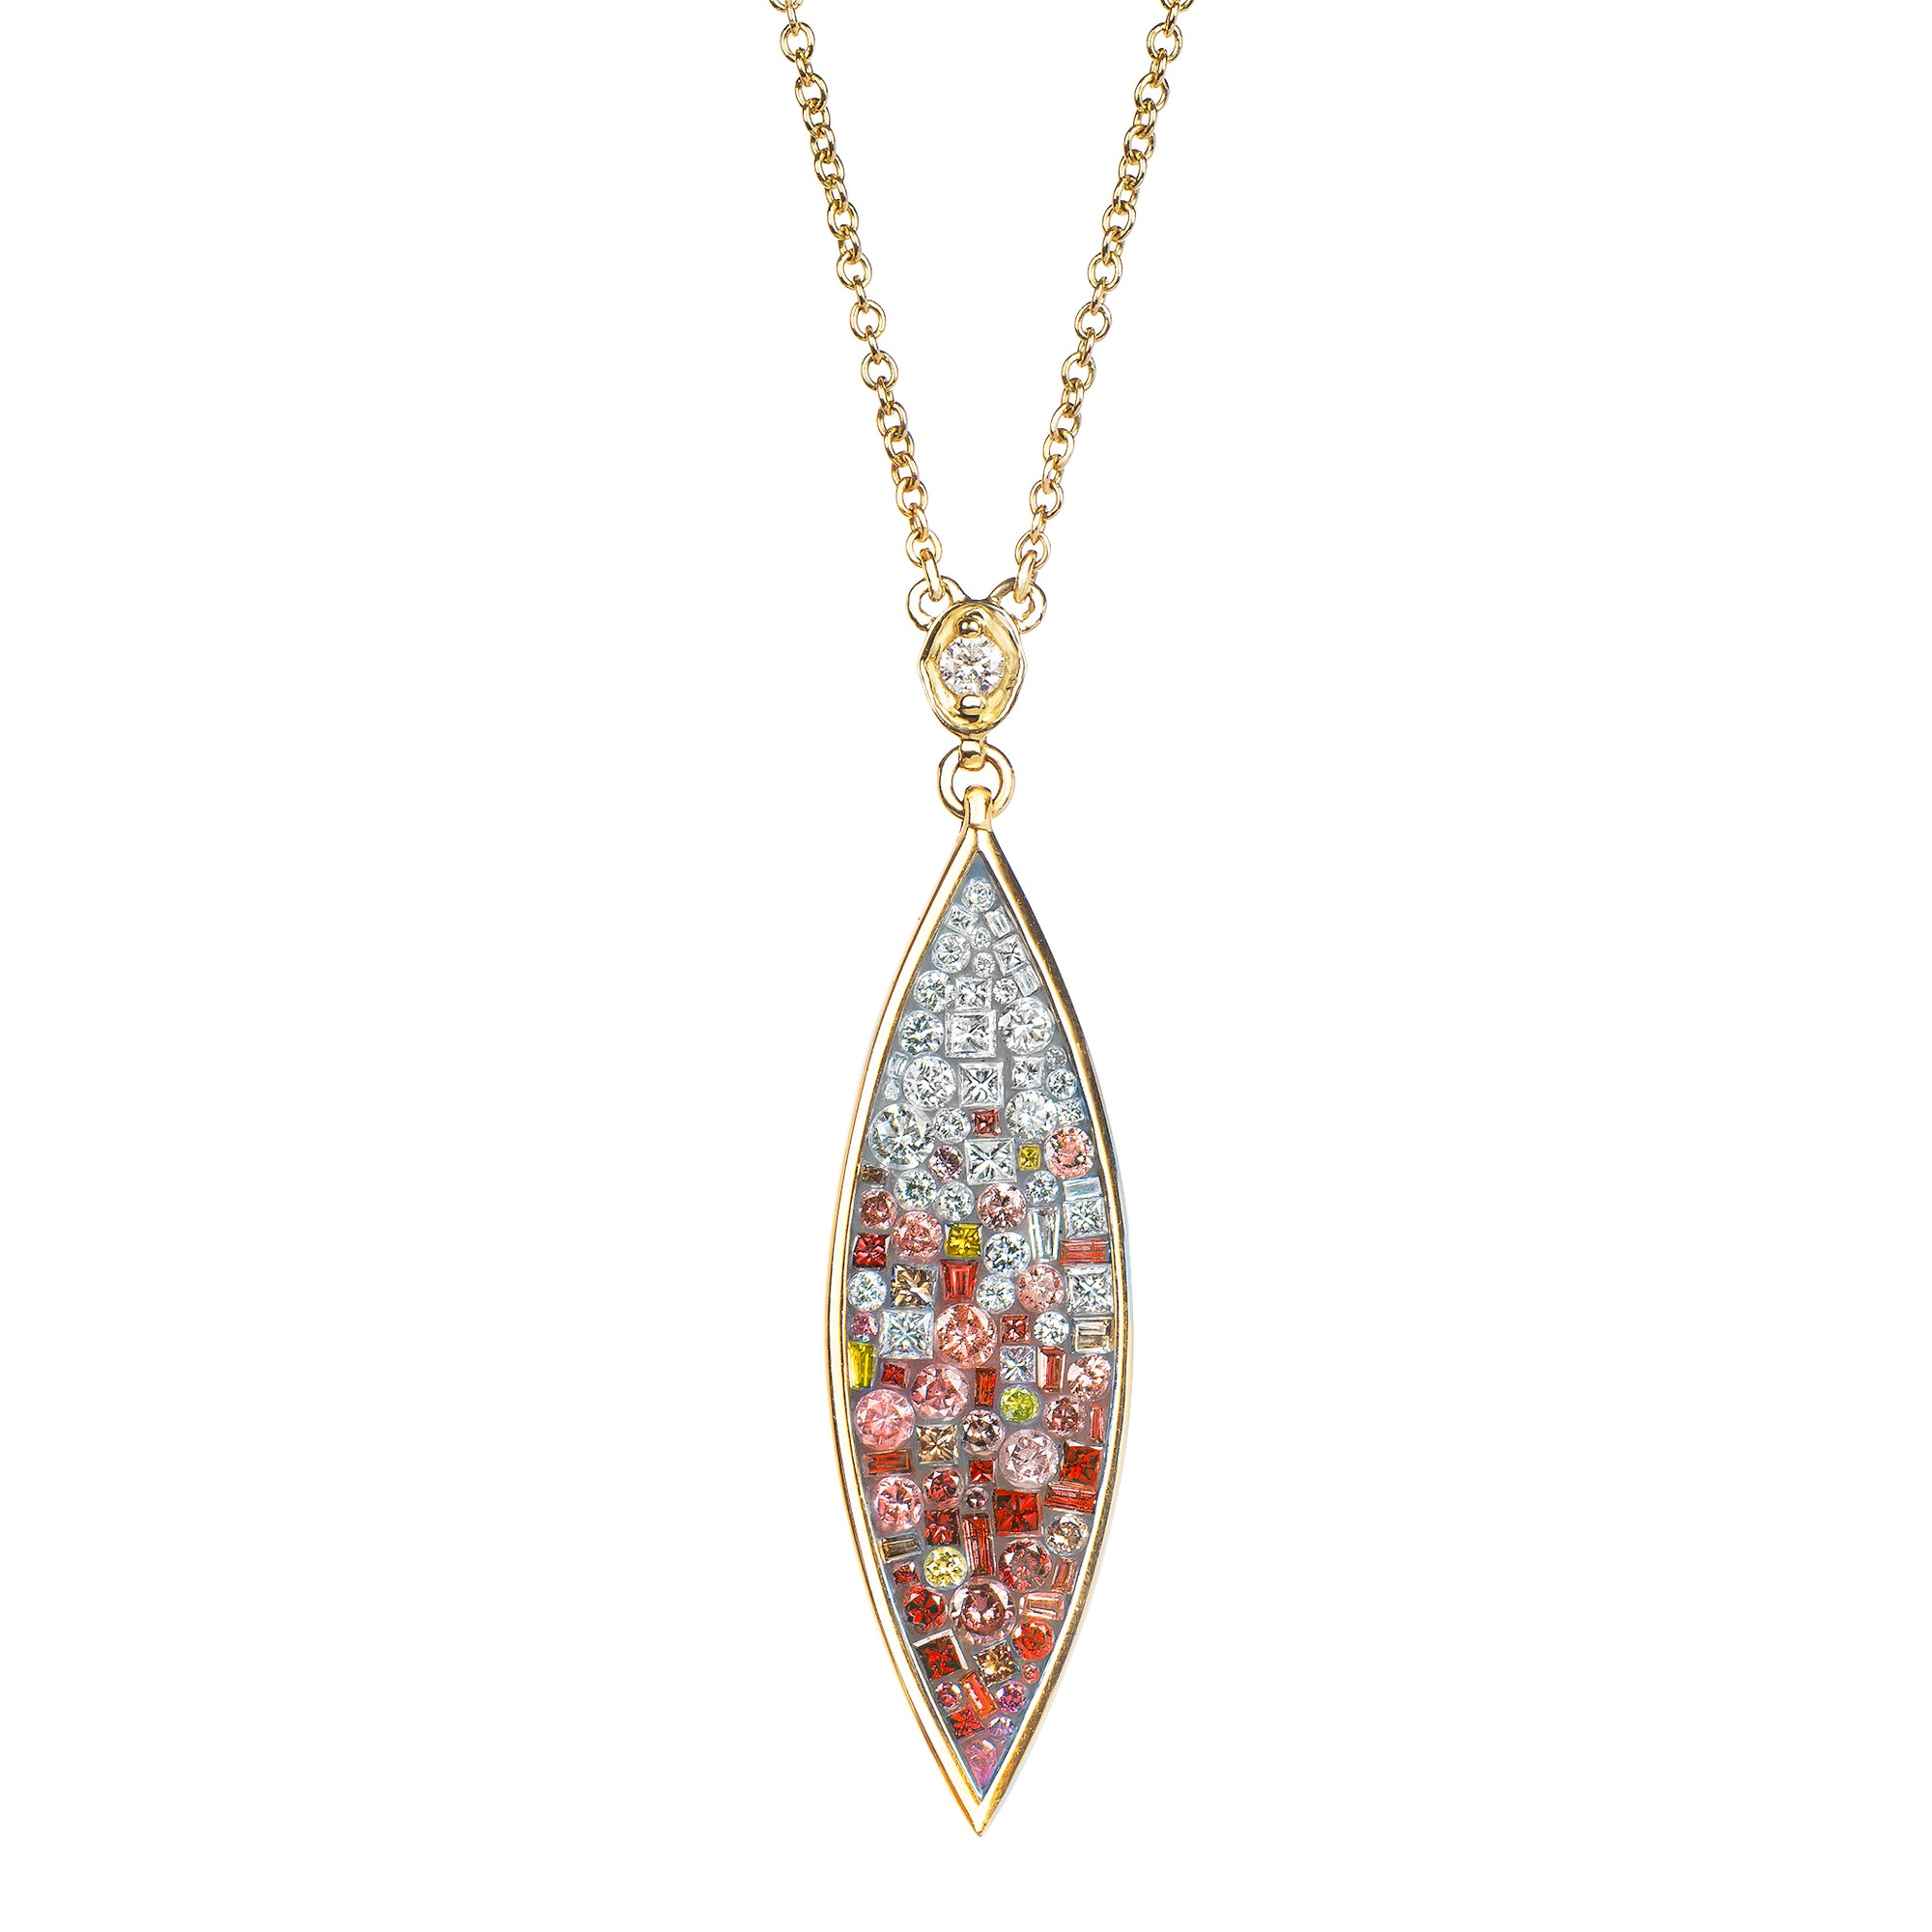 -Raspberry and White Ombre Diamond Small Supernova Necklace with 18k Chain